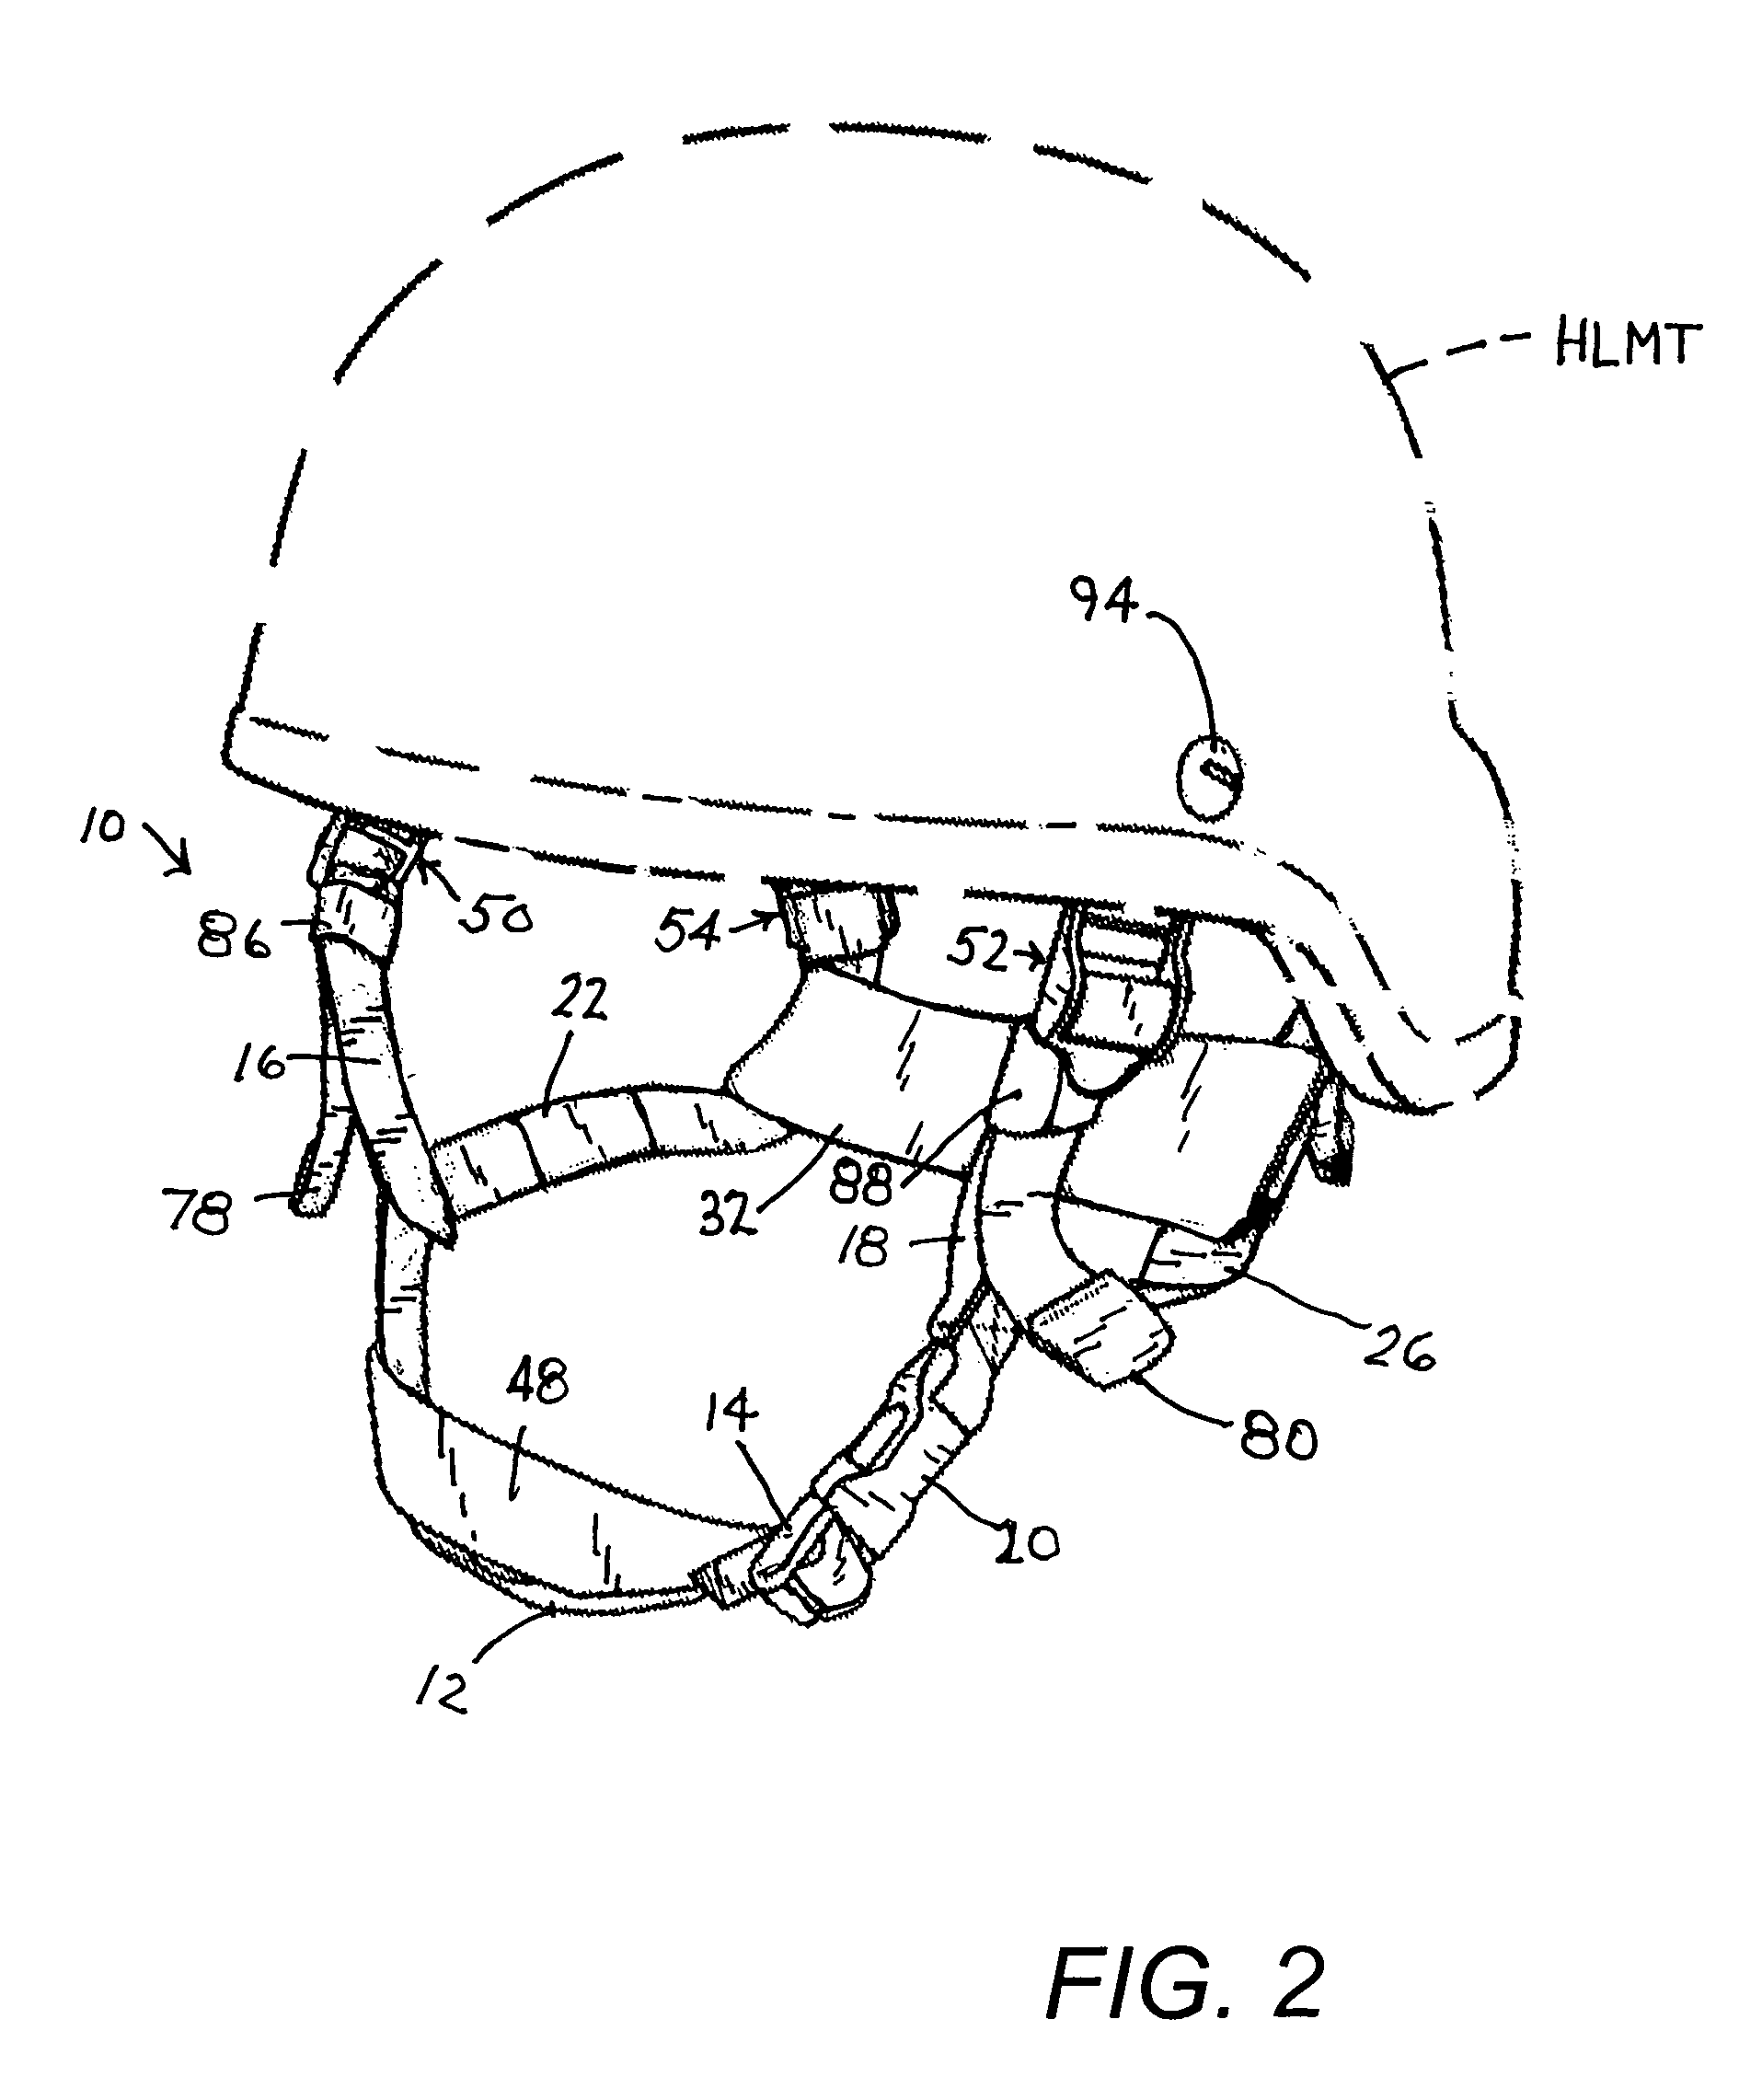 Chin strap assembly for helmet